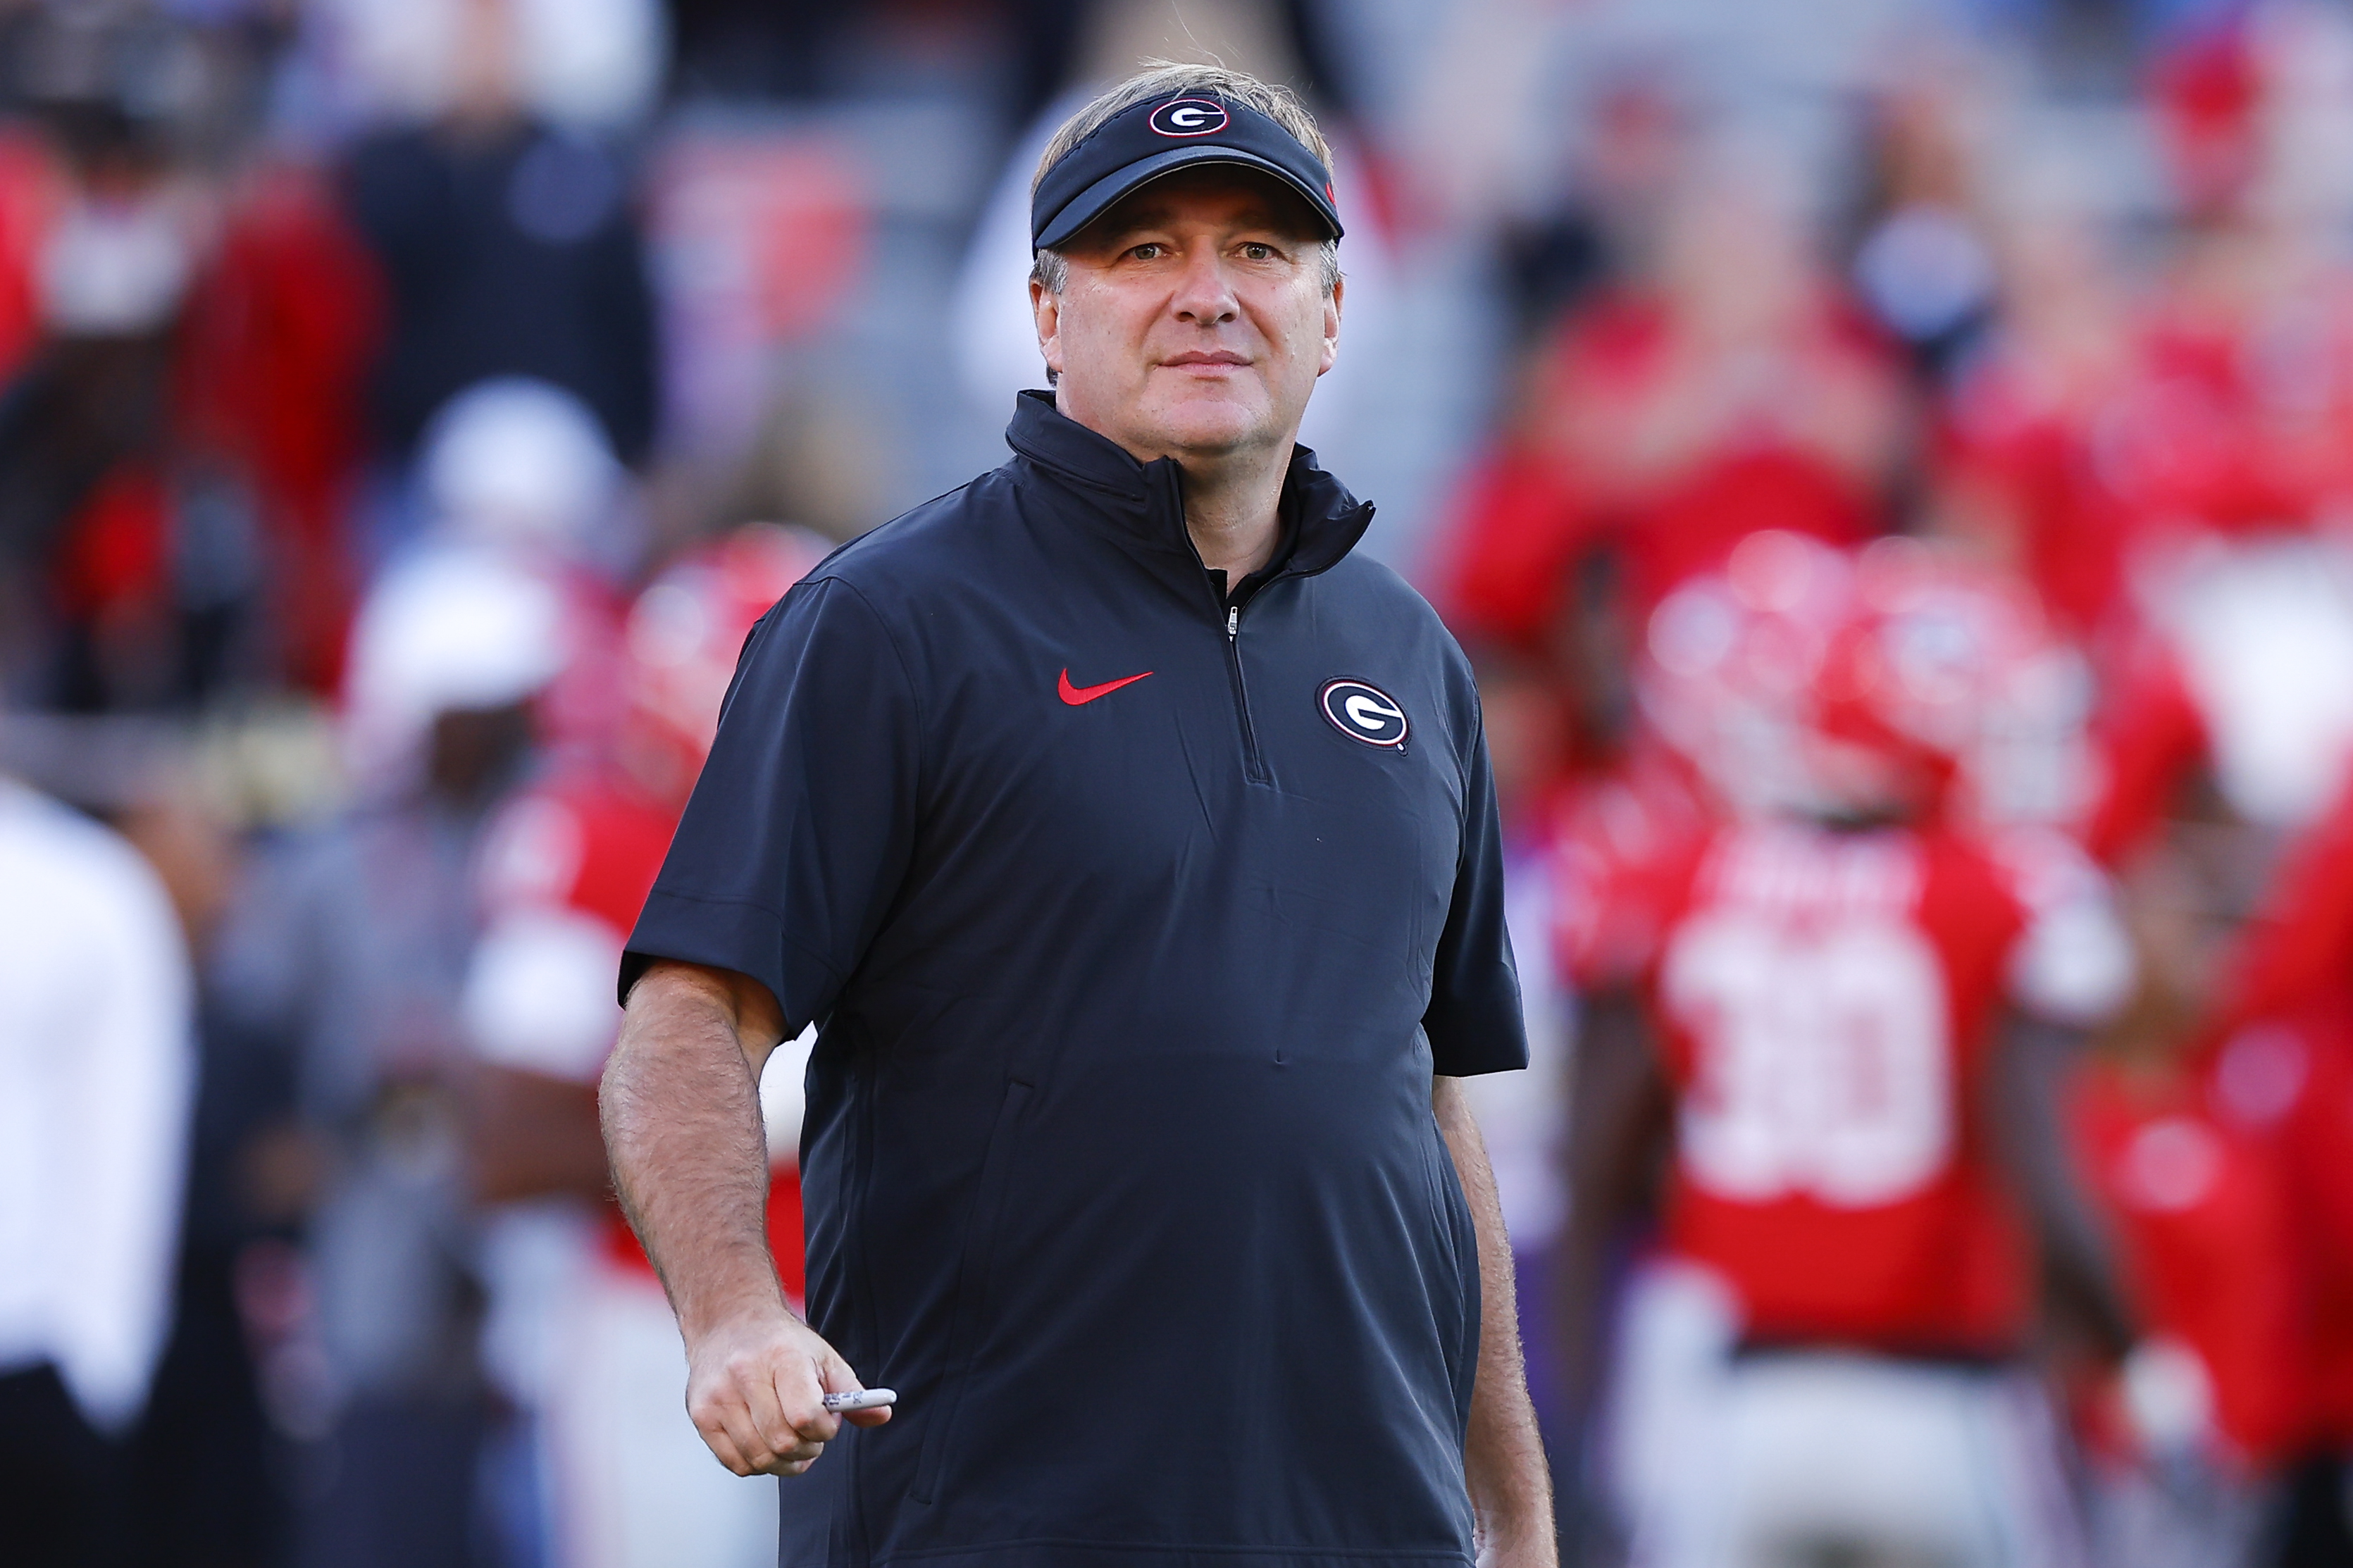 Georgia Coach 'Really Comfortable With Not Paying Attention' to CFP Ranking